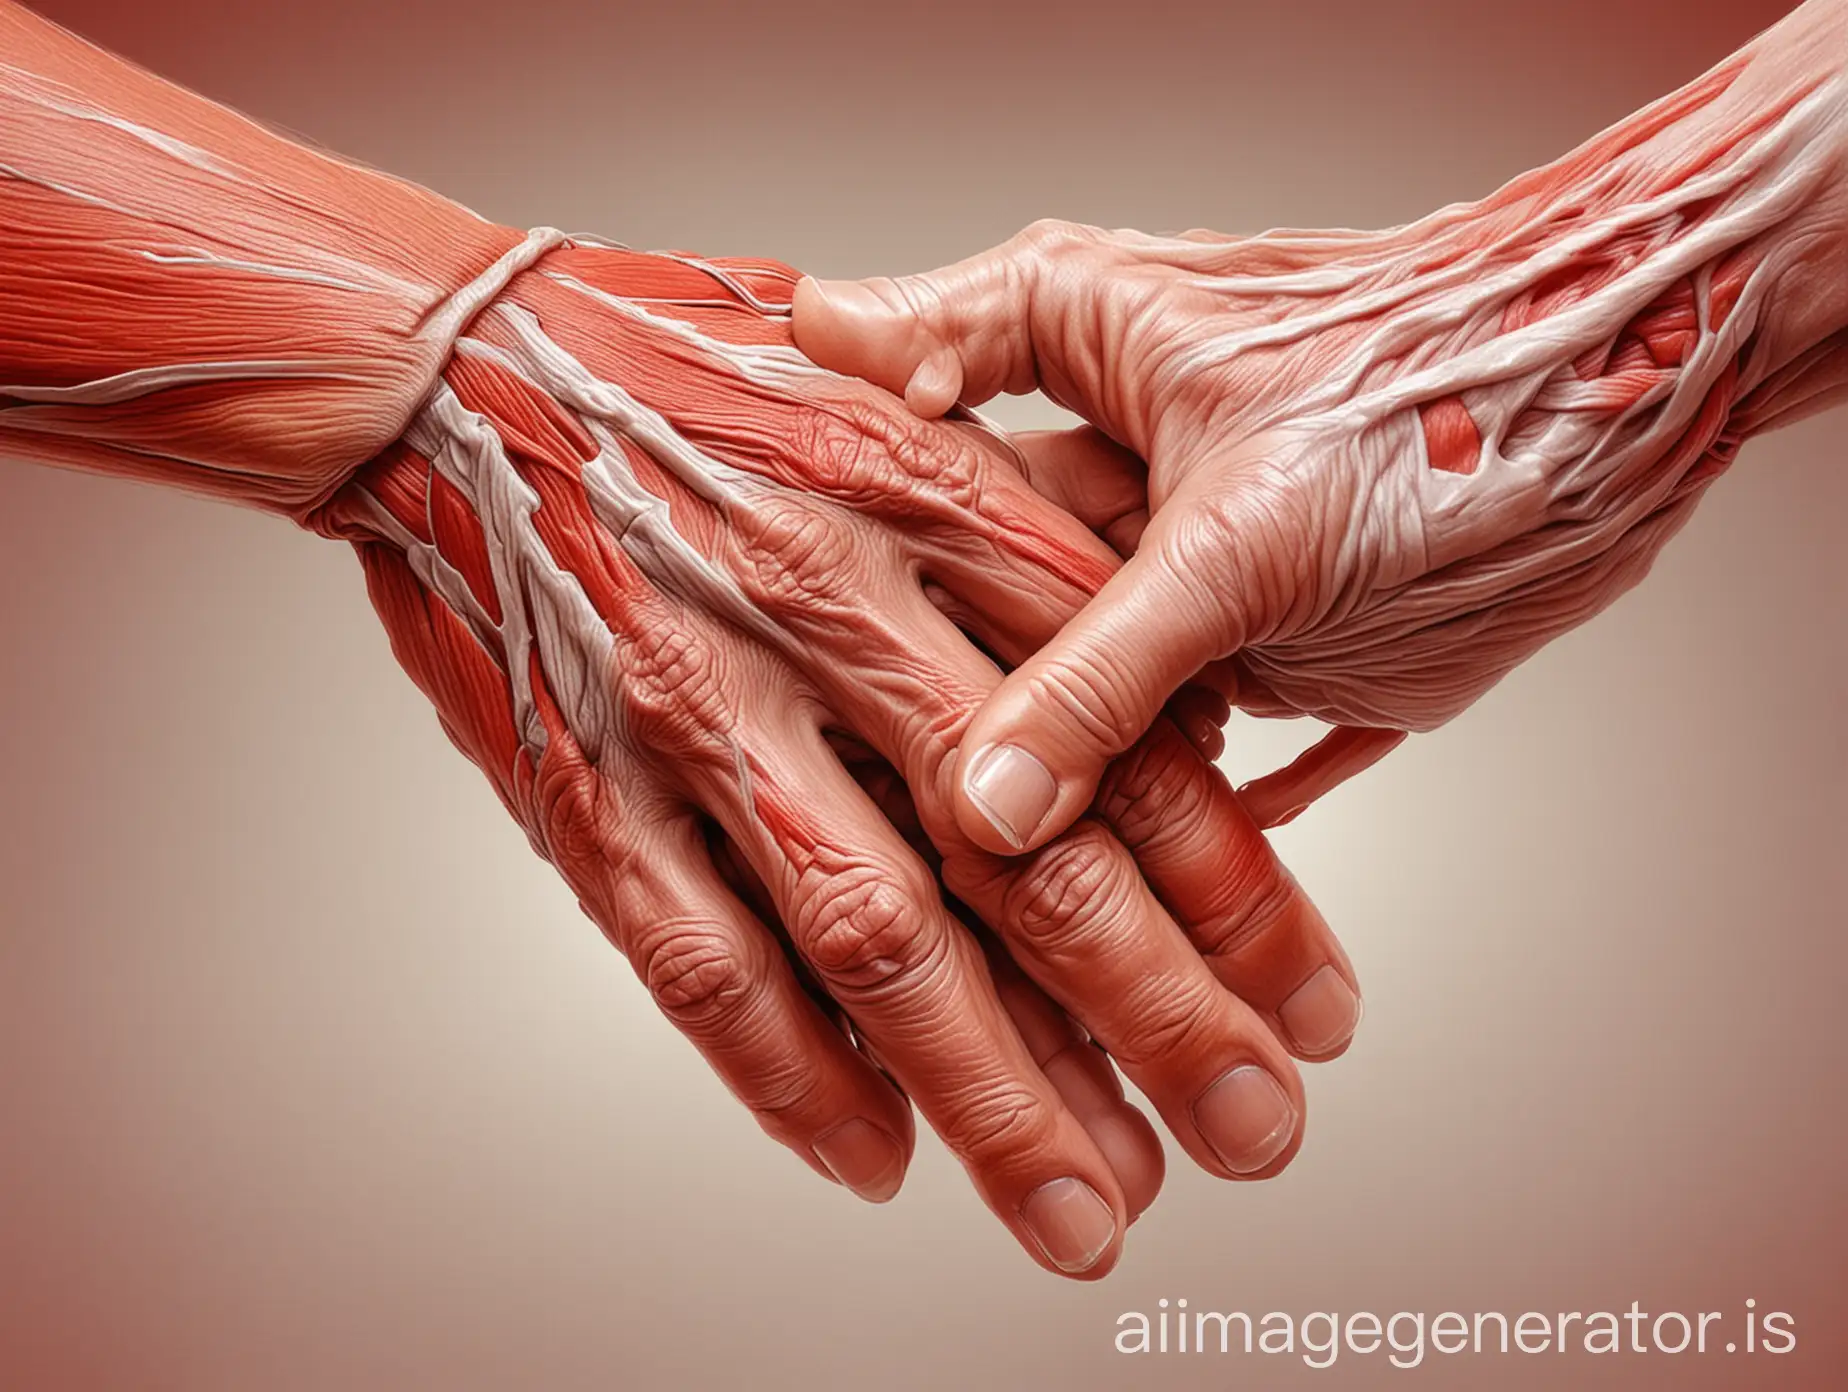 Interconnected-Hands-Grasping-with-Visible-Muscles-and-Tendons-on-FleshColored-Skin